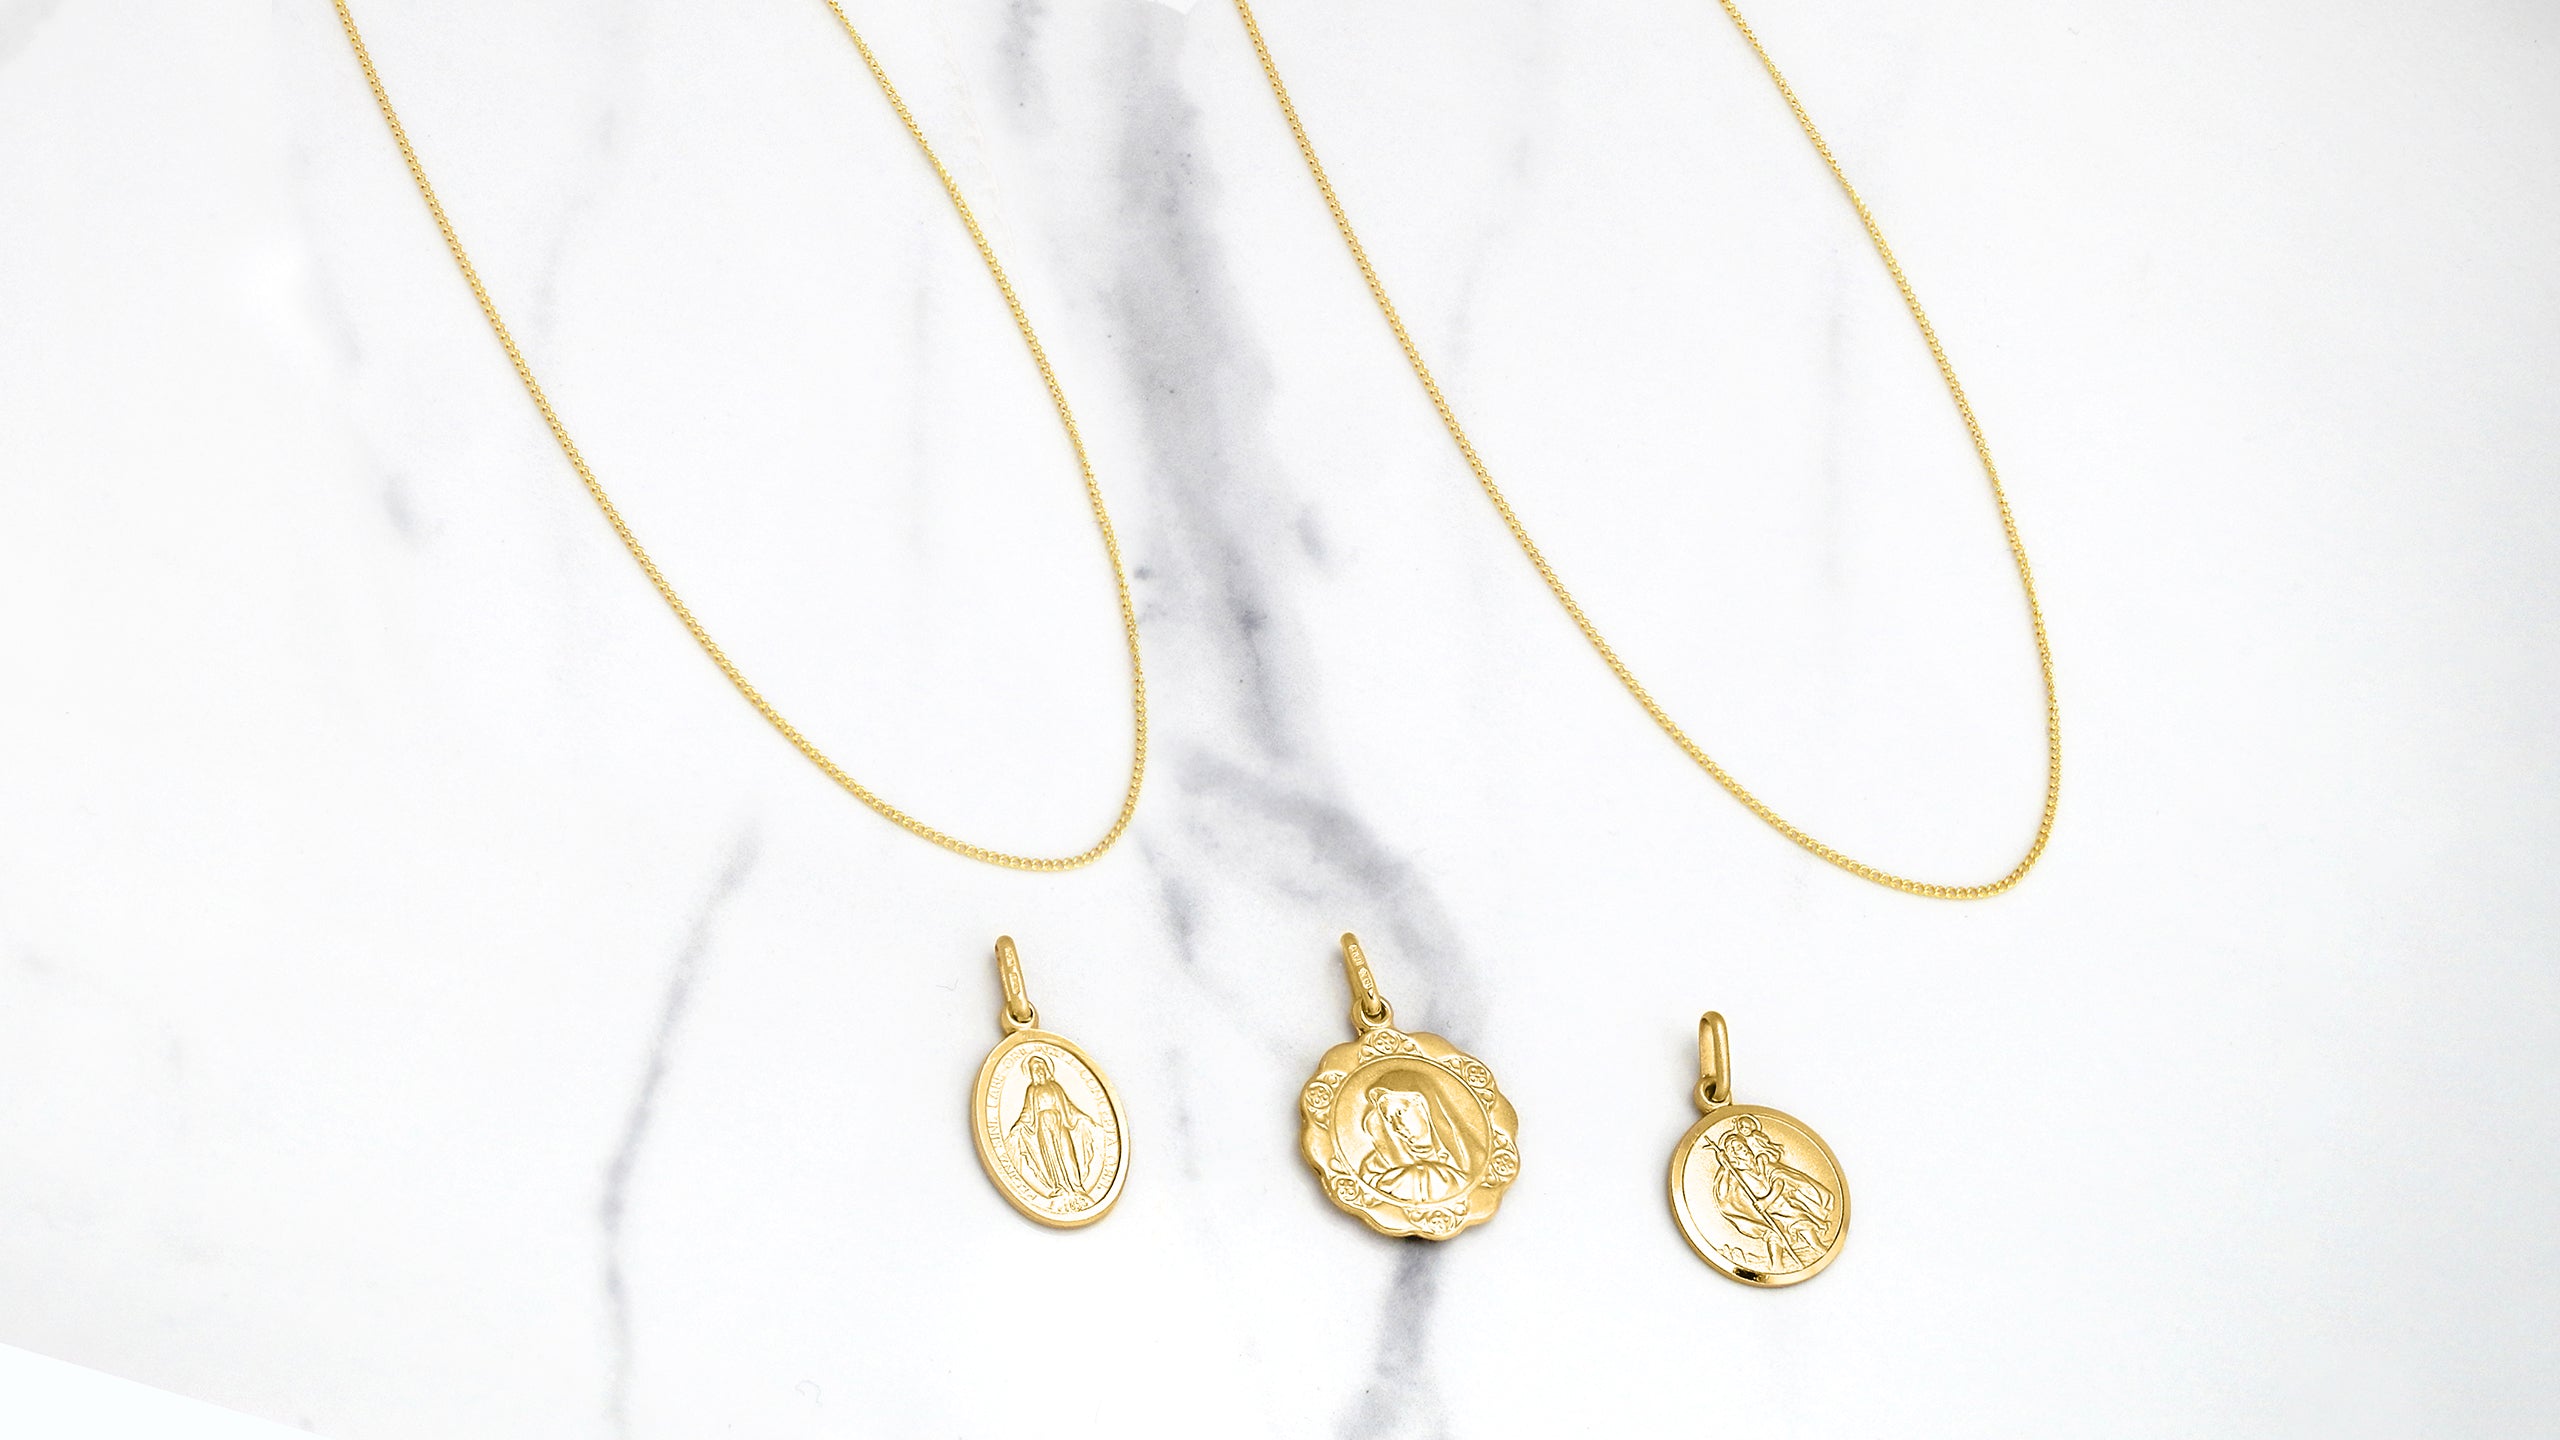 Solid Yellow Gold Religious Medallions and Chains